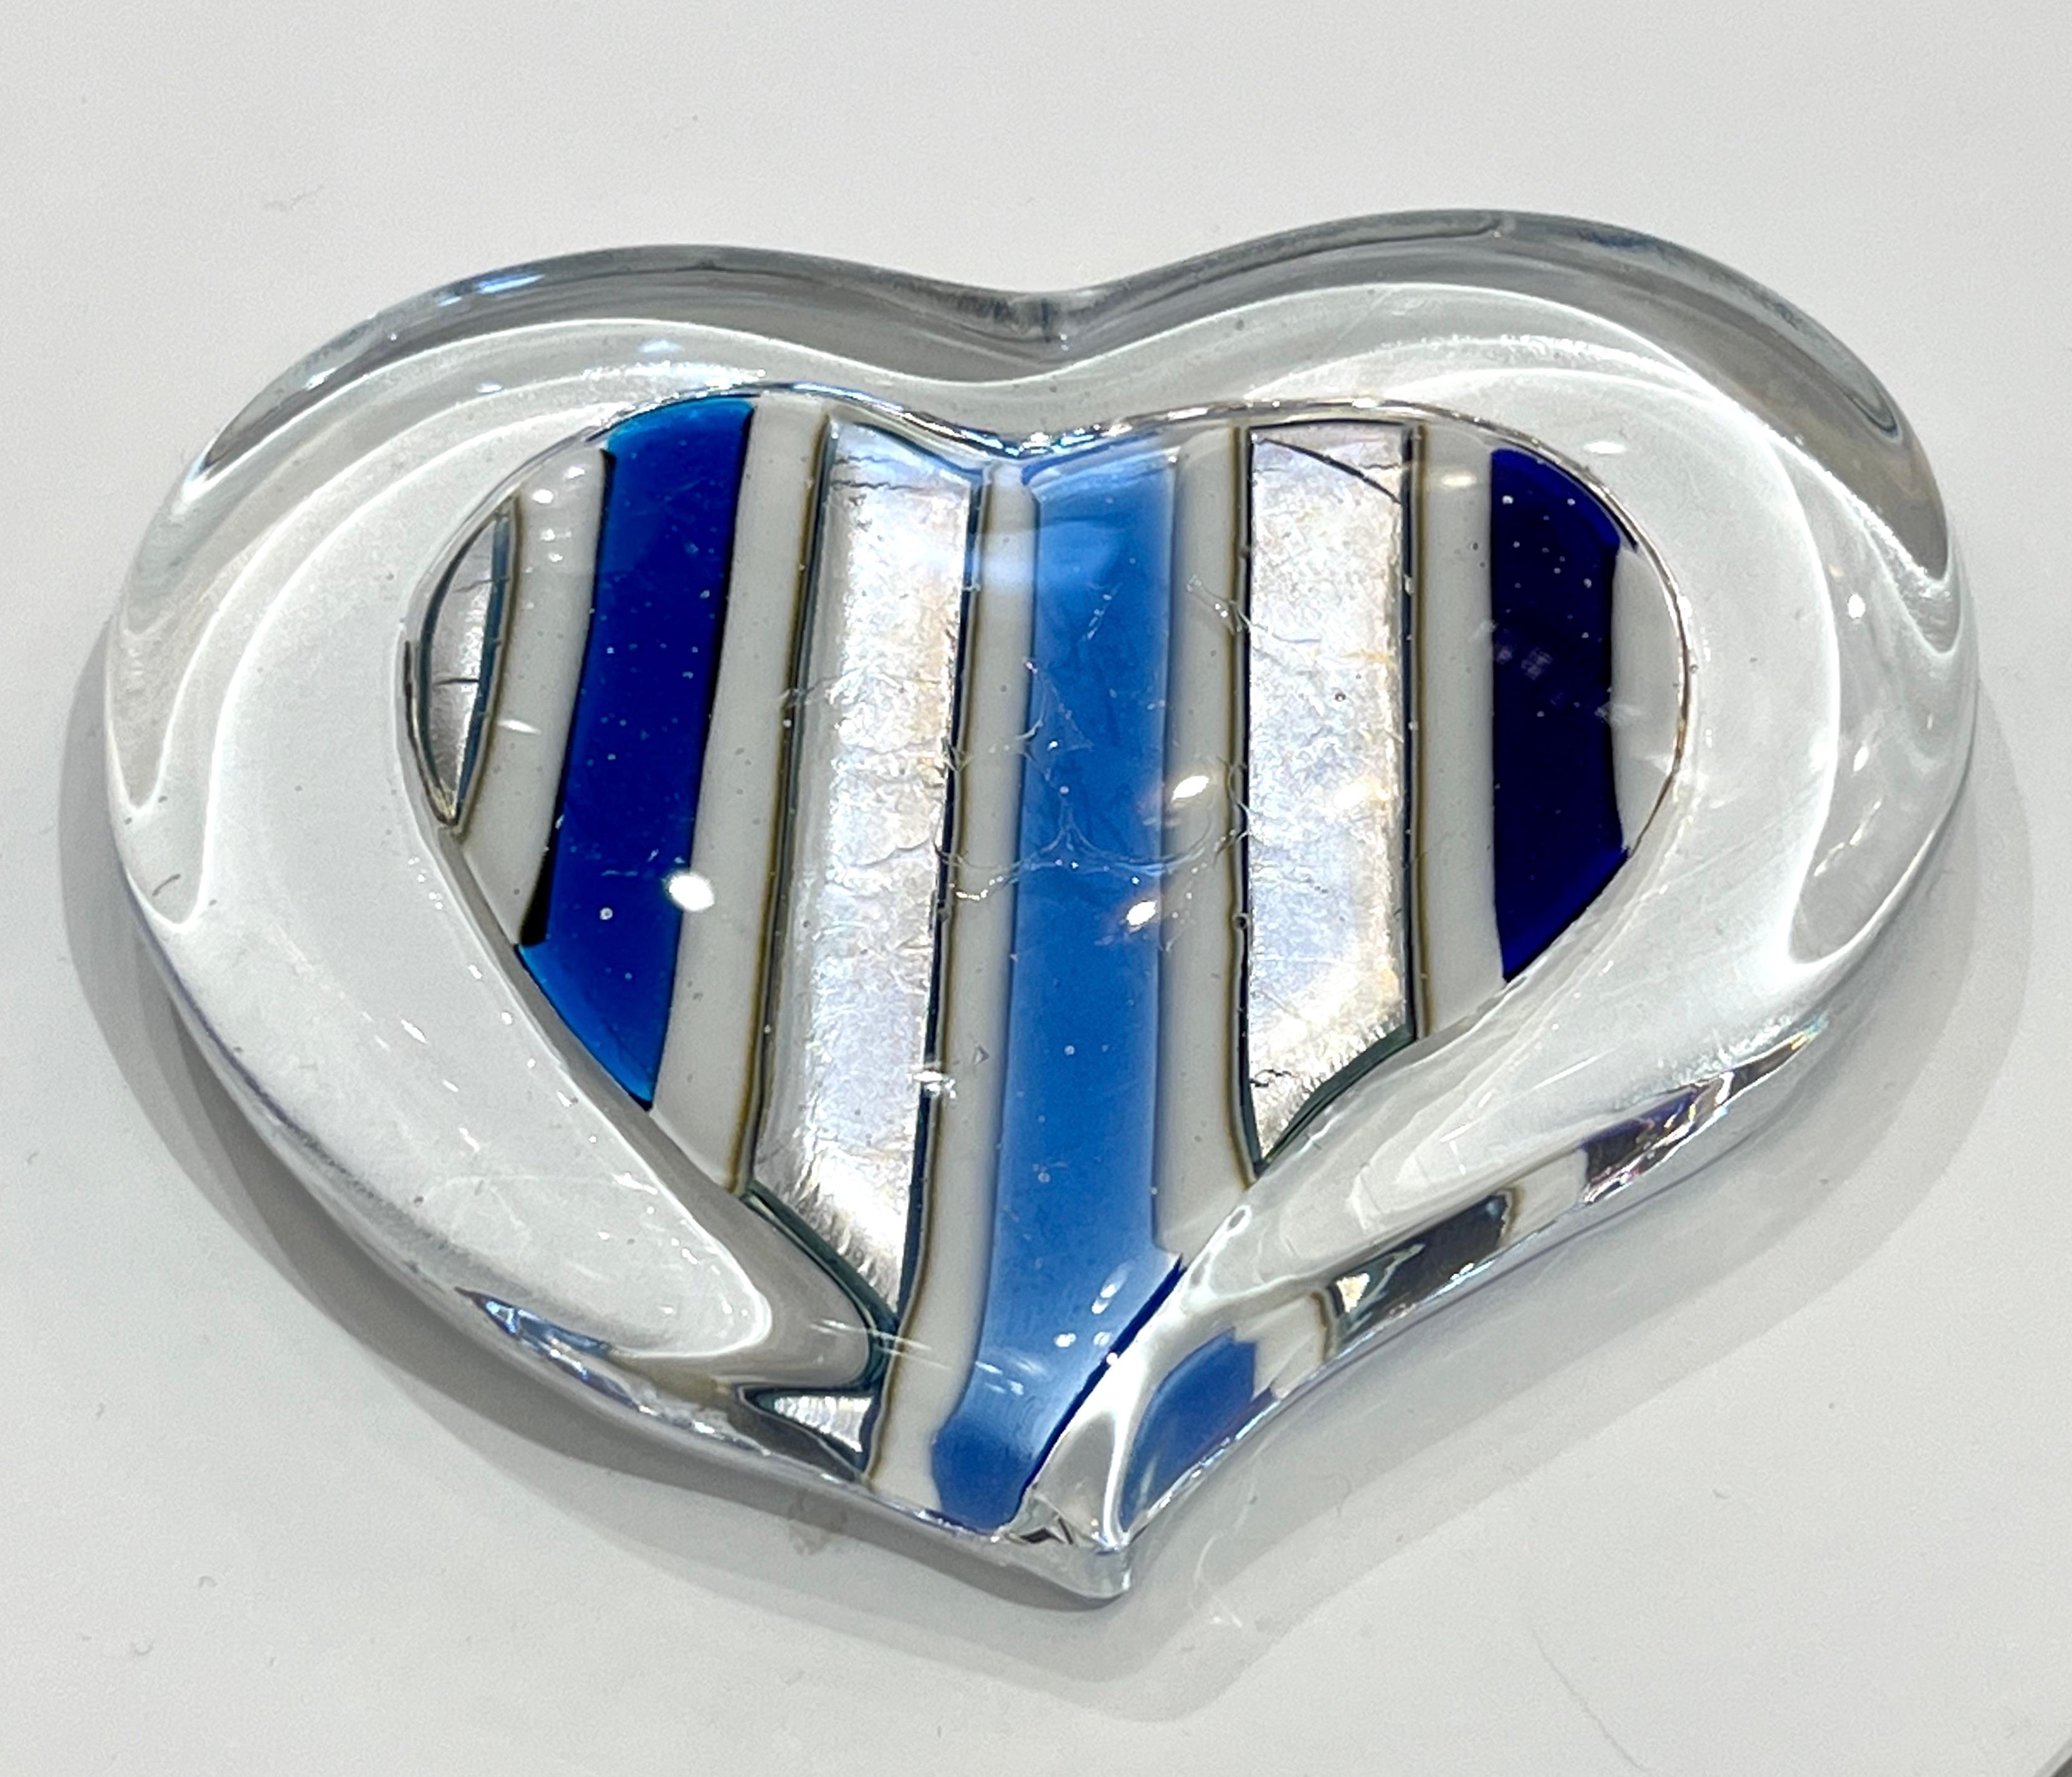 Contemporary Italian heart paperweight with striped post-modern decor, exclusive for Cosulich Interiors & Antiques by VeVe Glass, entirely handcrafted in colored Murano glass, white, silver, turquoise sky blue, lavender, cobalt royal blue colors,